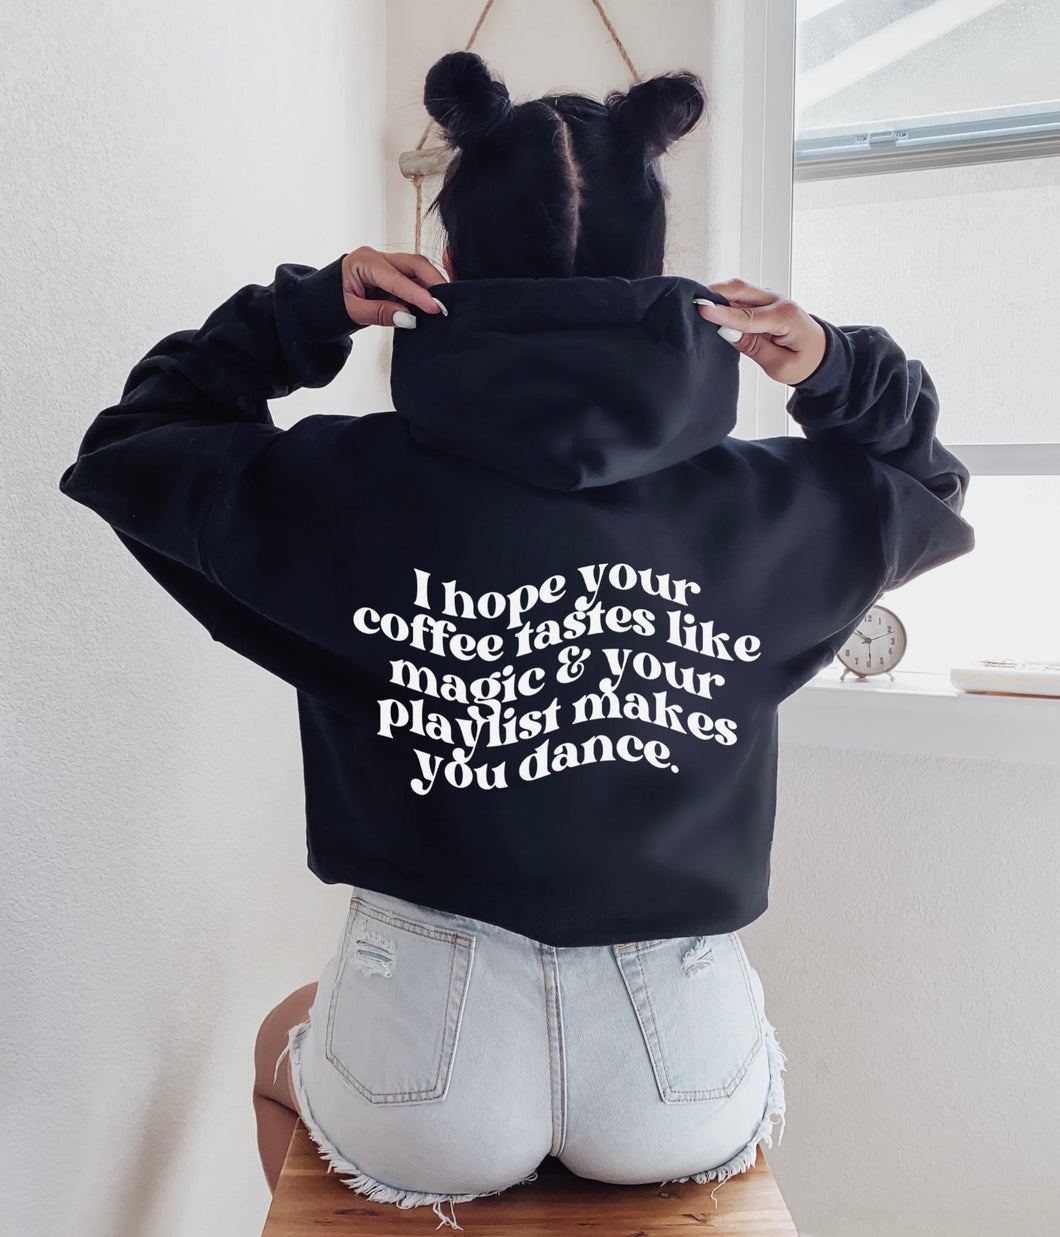 I hope your playlist makes you dance | Hoodie